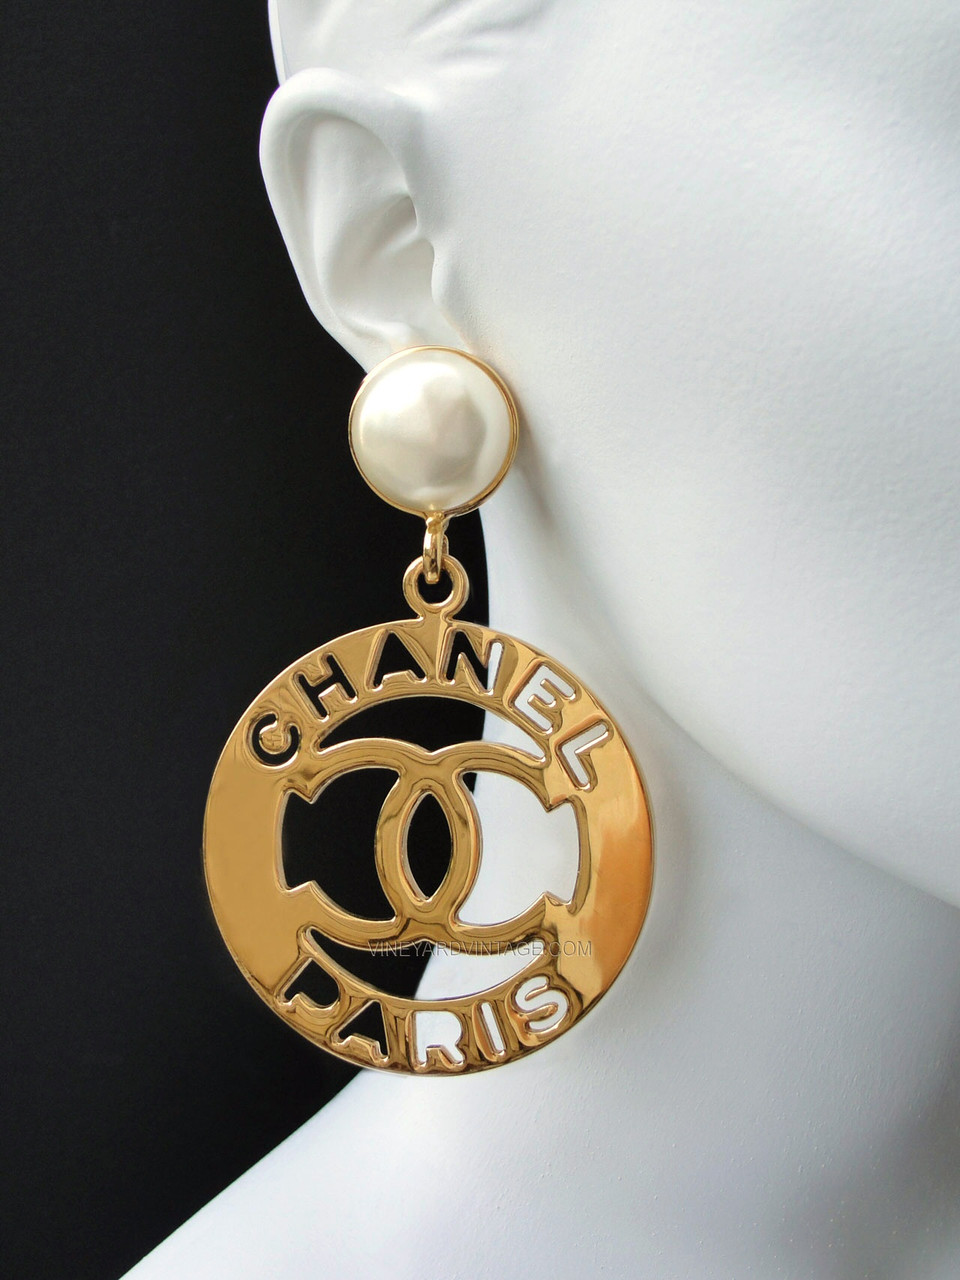 Chanel Large Hanging CC Earrings